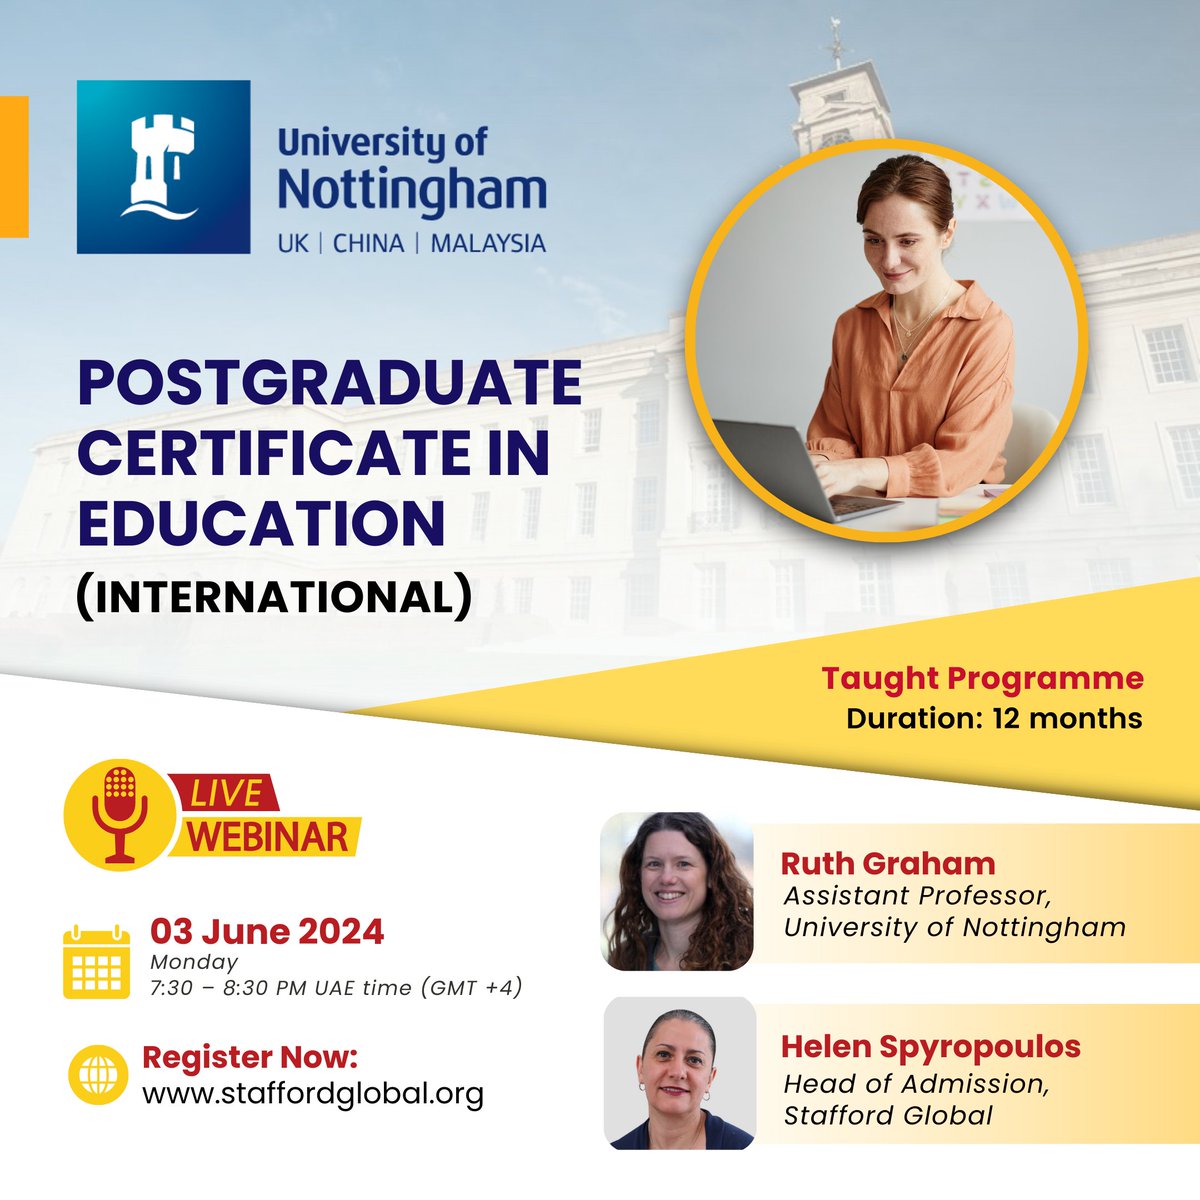 Join our FREE webinar with Prof. Ruth Graham (UniofNottingham )& explore the PGCEi (Intl.) programme for educators outside the UK. 📆 Monday, 3 June, 2024 | 7:30 PM UAE time (GMT +4) Register👉 staffordglobal.org/events/univers… #StaffordGlobal #UniversityOfNottingham #PGCEi #Webinar